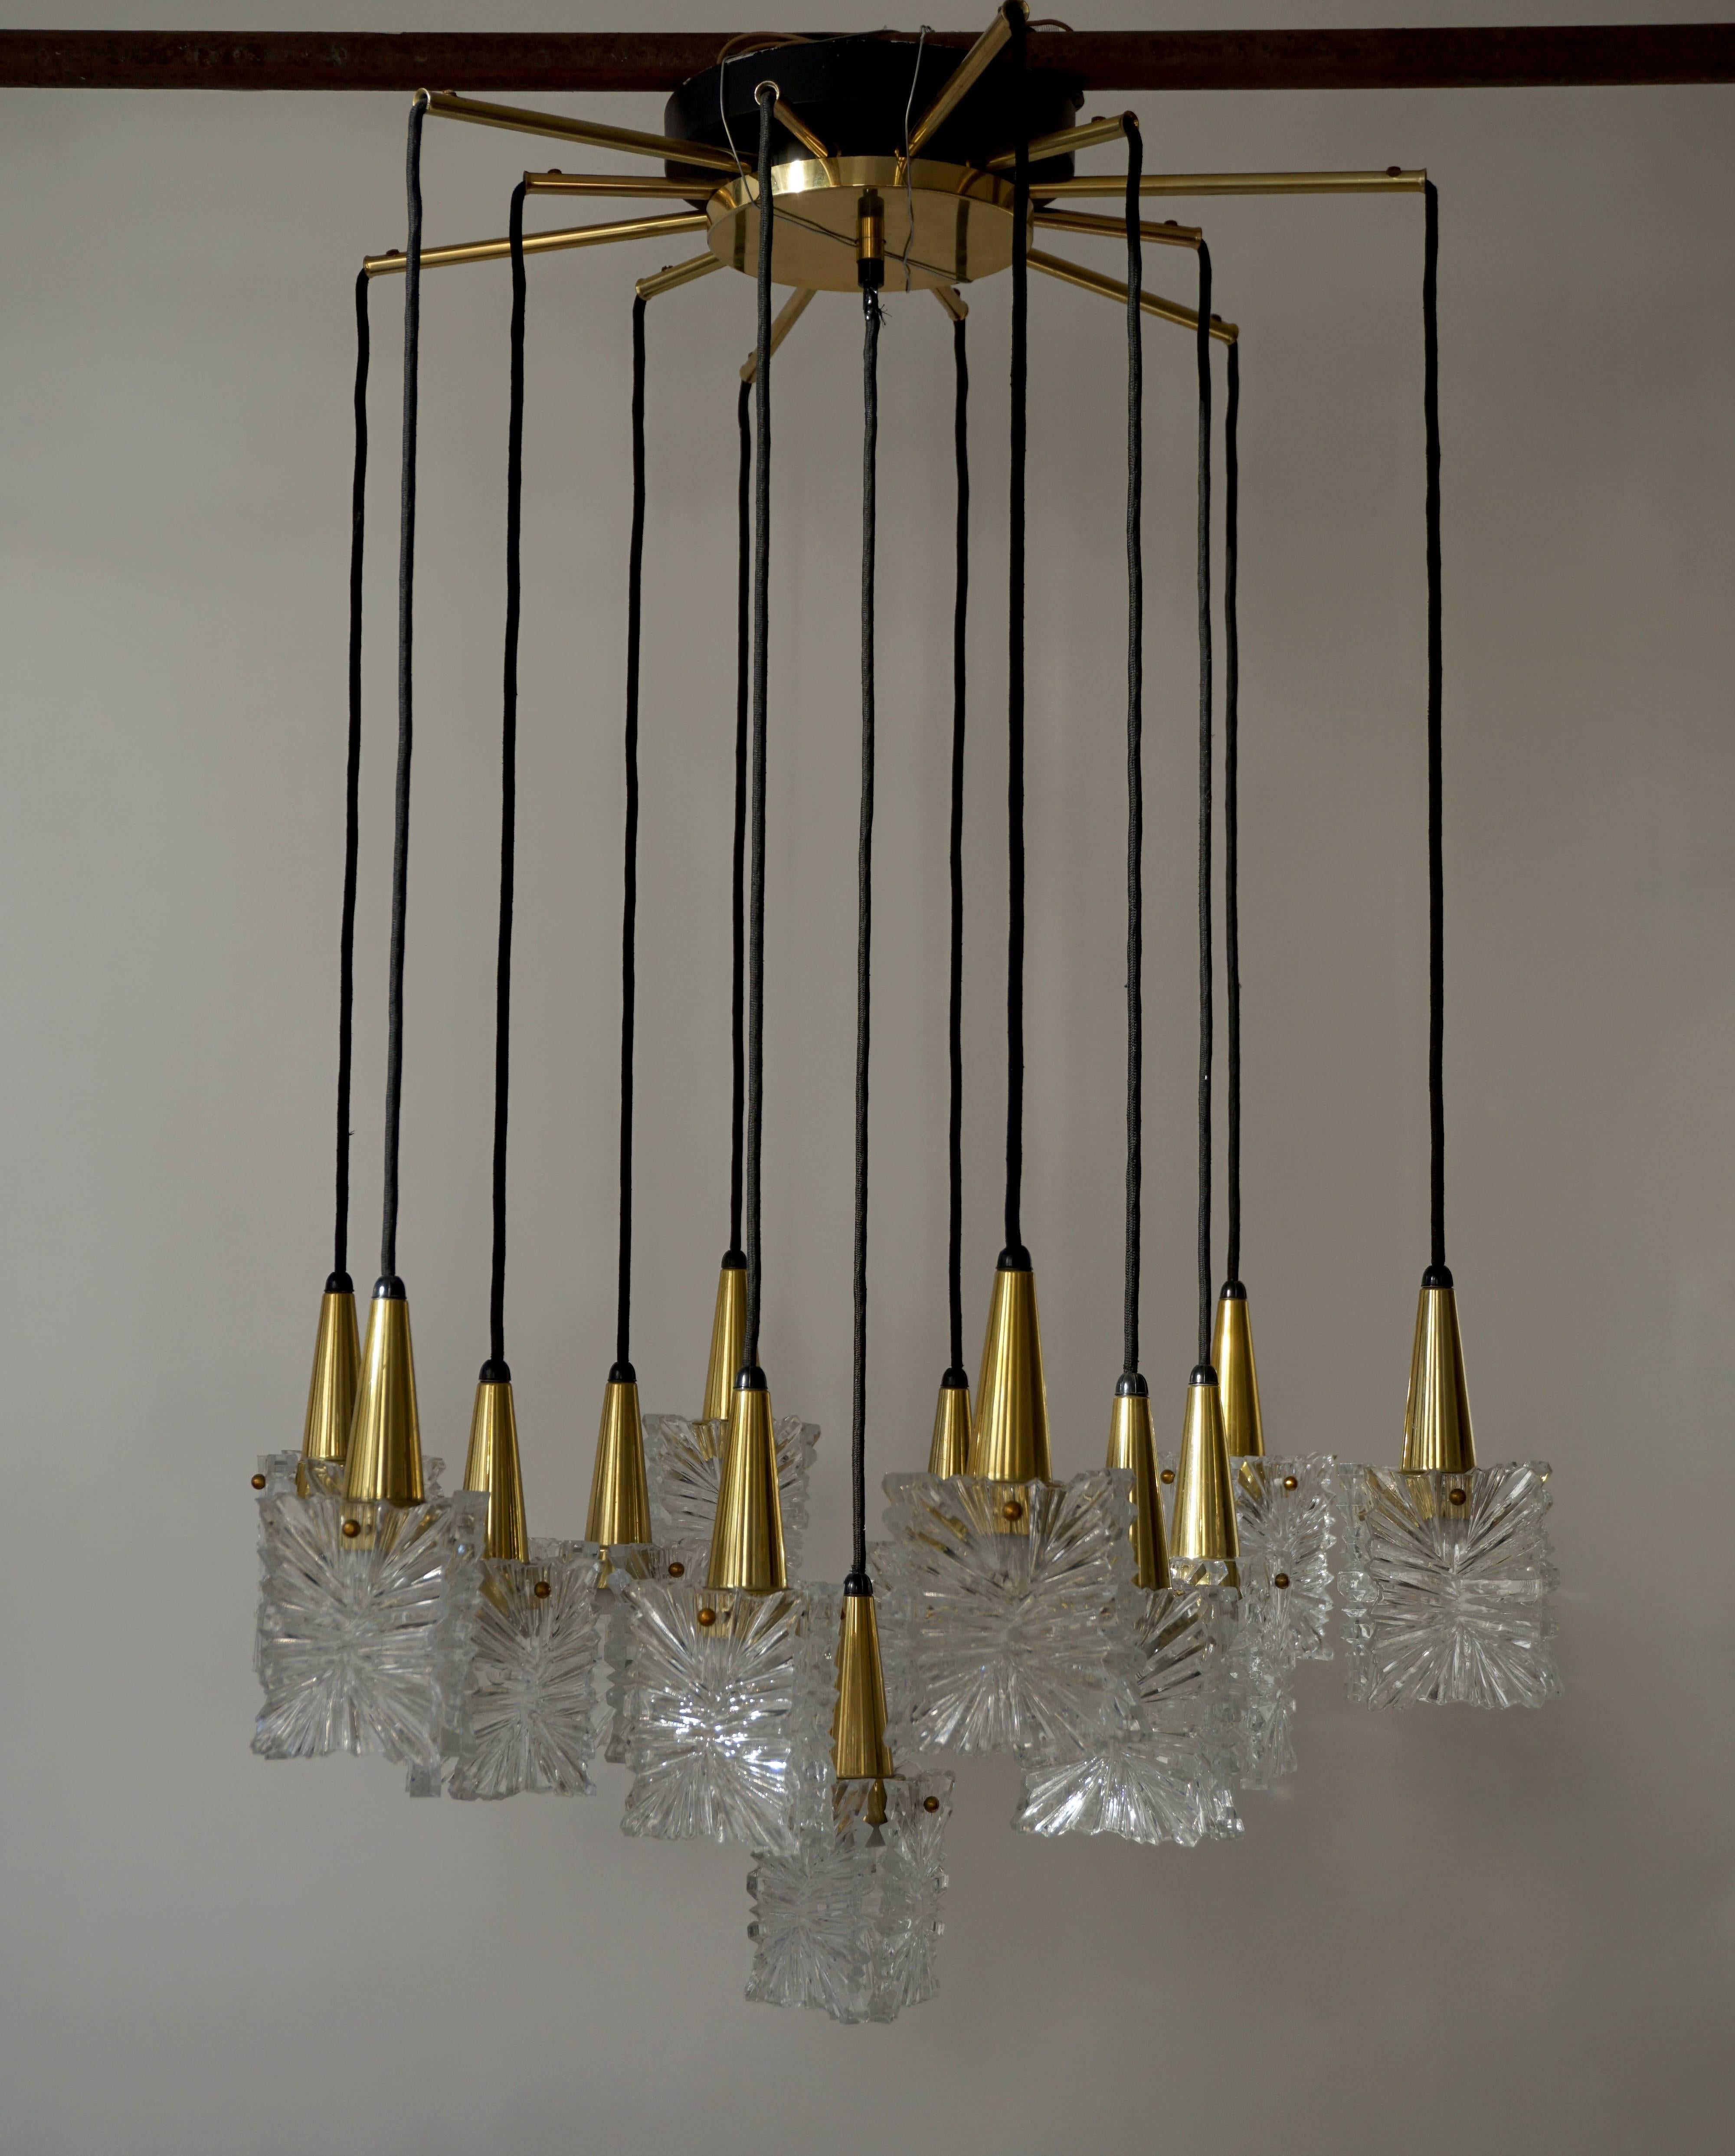 Glass and brass chandelier by RAAK, Netherlands.
There are four extra glass elements.